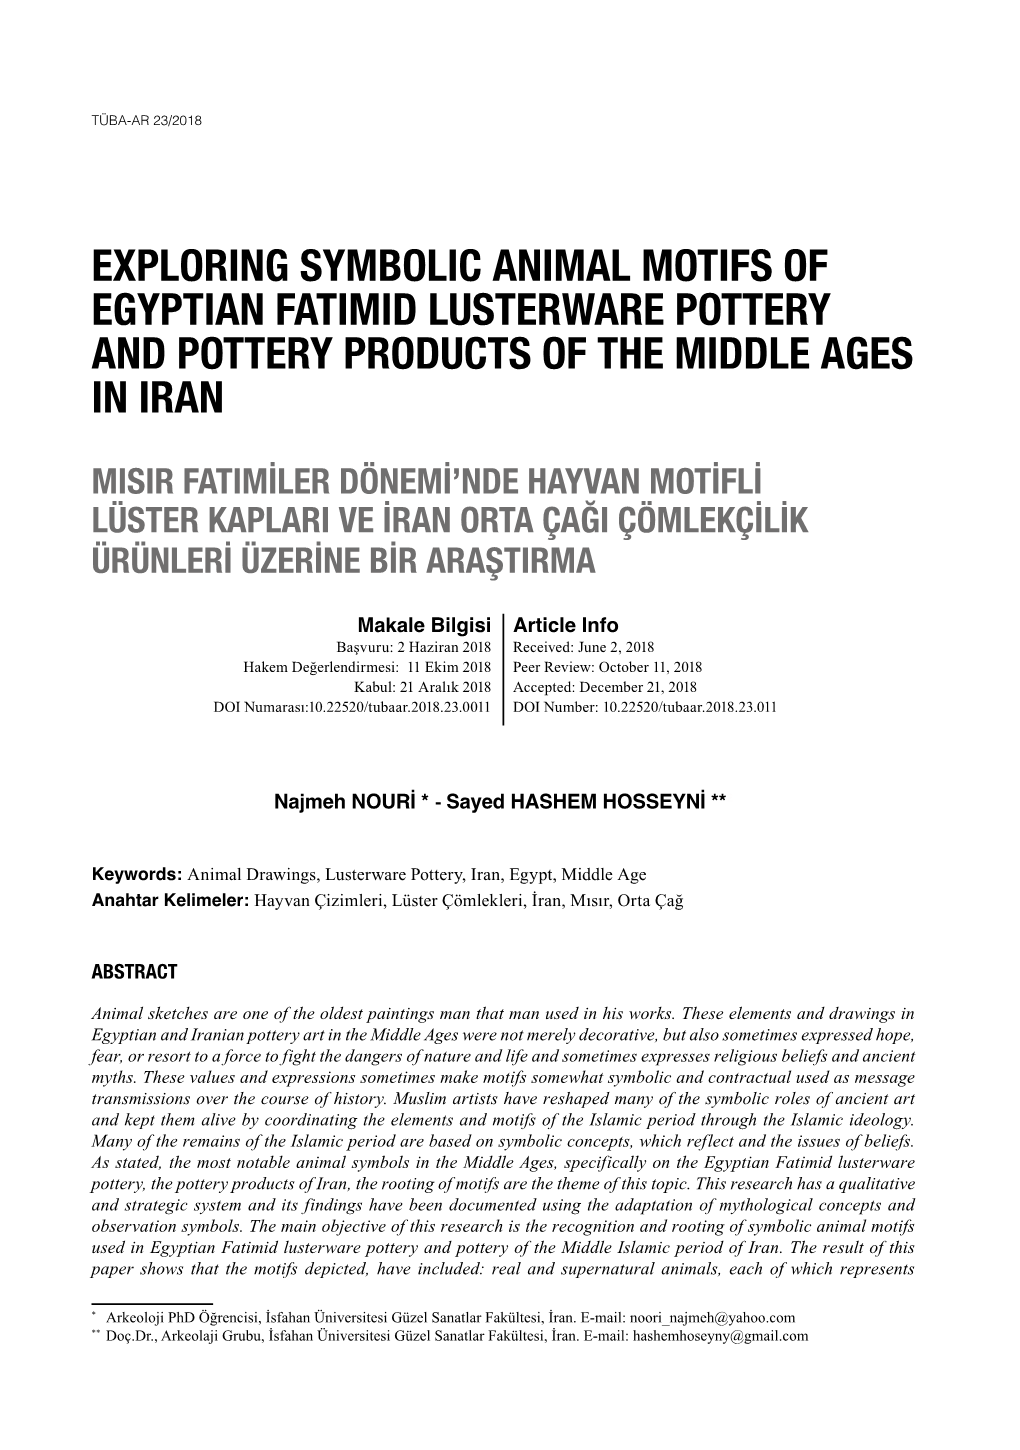 Exploring Symbolic Animal Motifs of Egyptian Fatimid Lusterware Pottery and Pottery Products of the Middle Ages in Iran